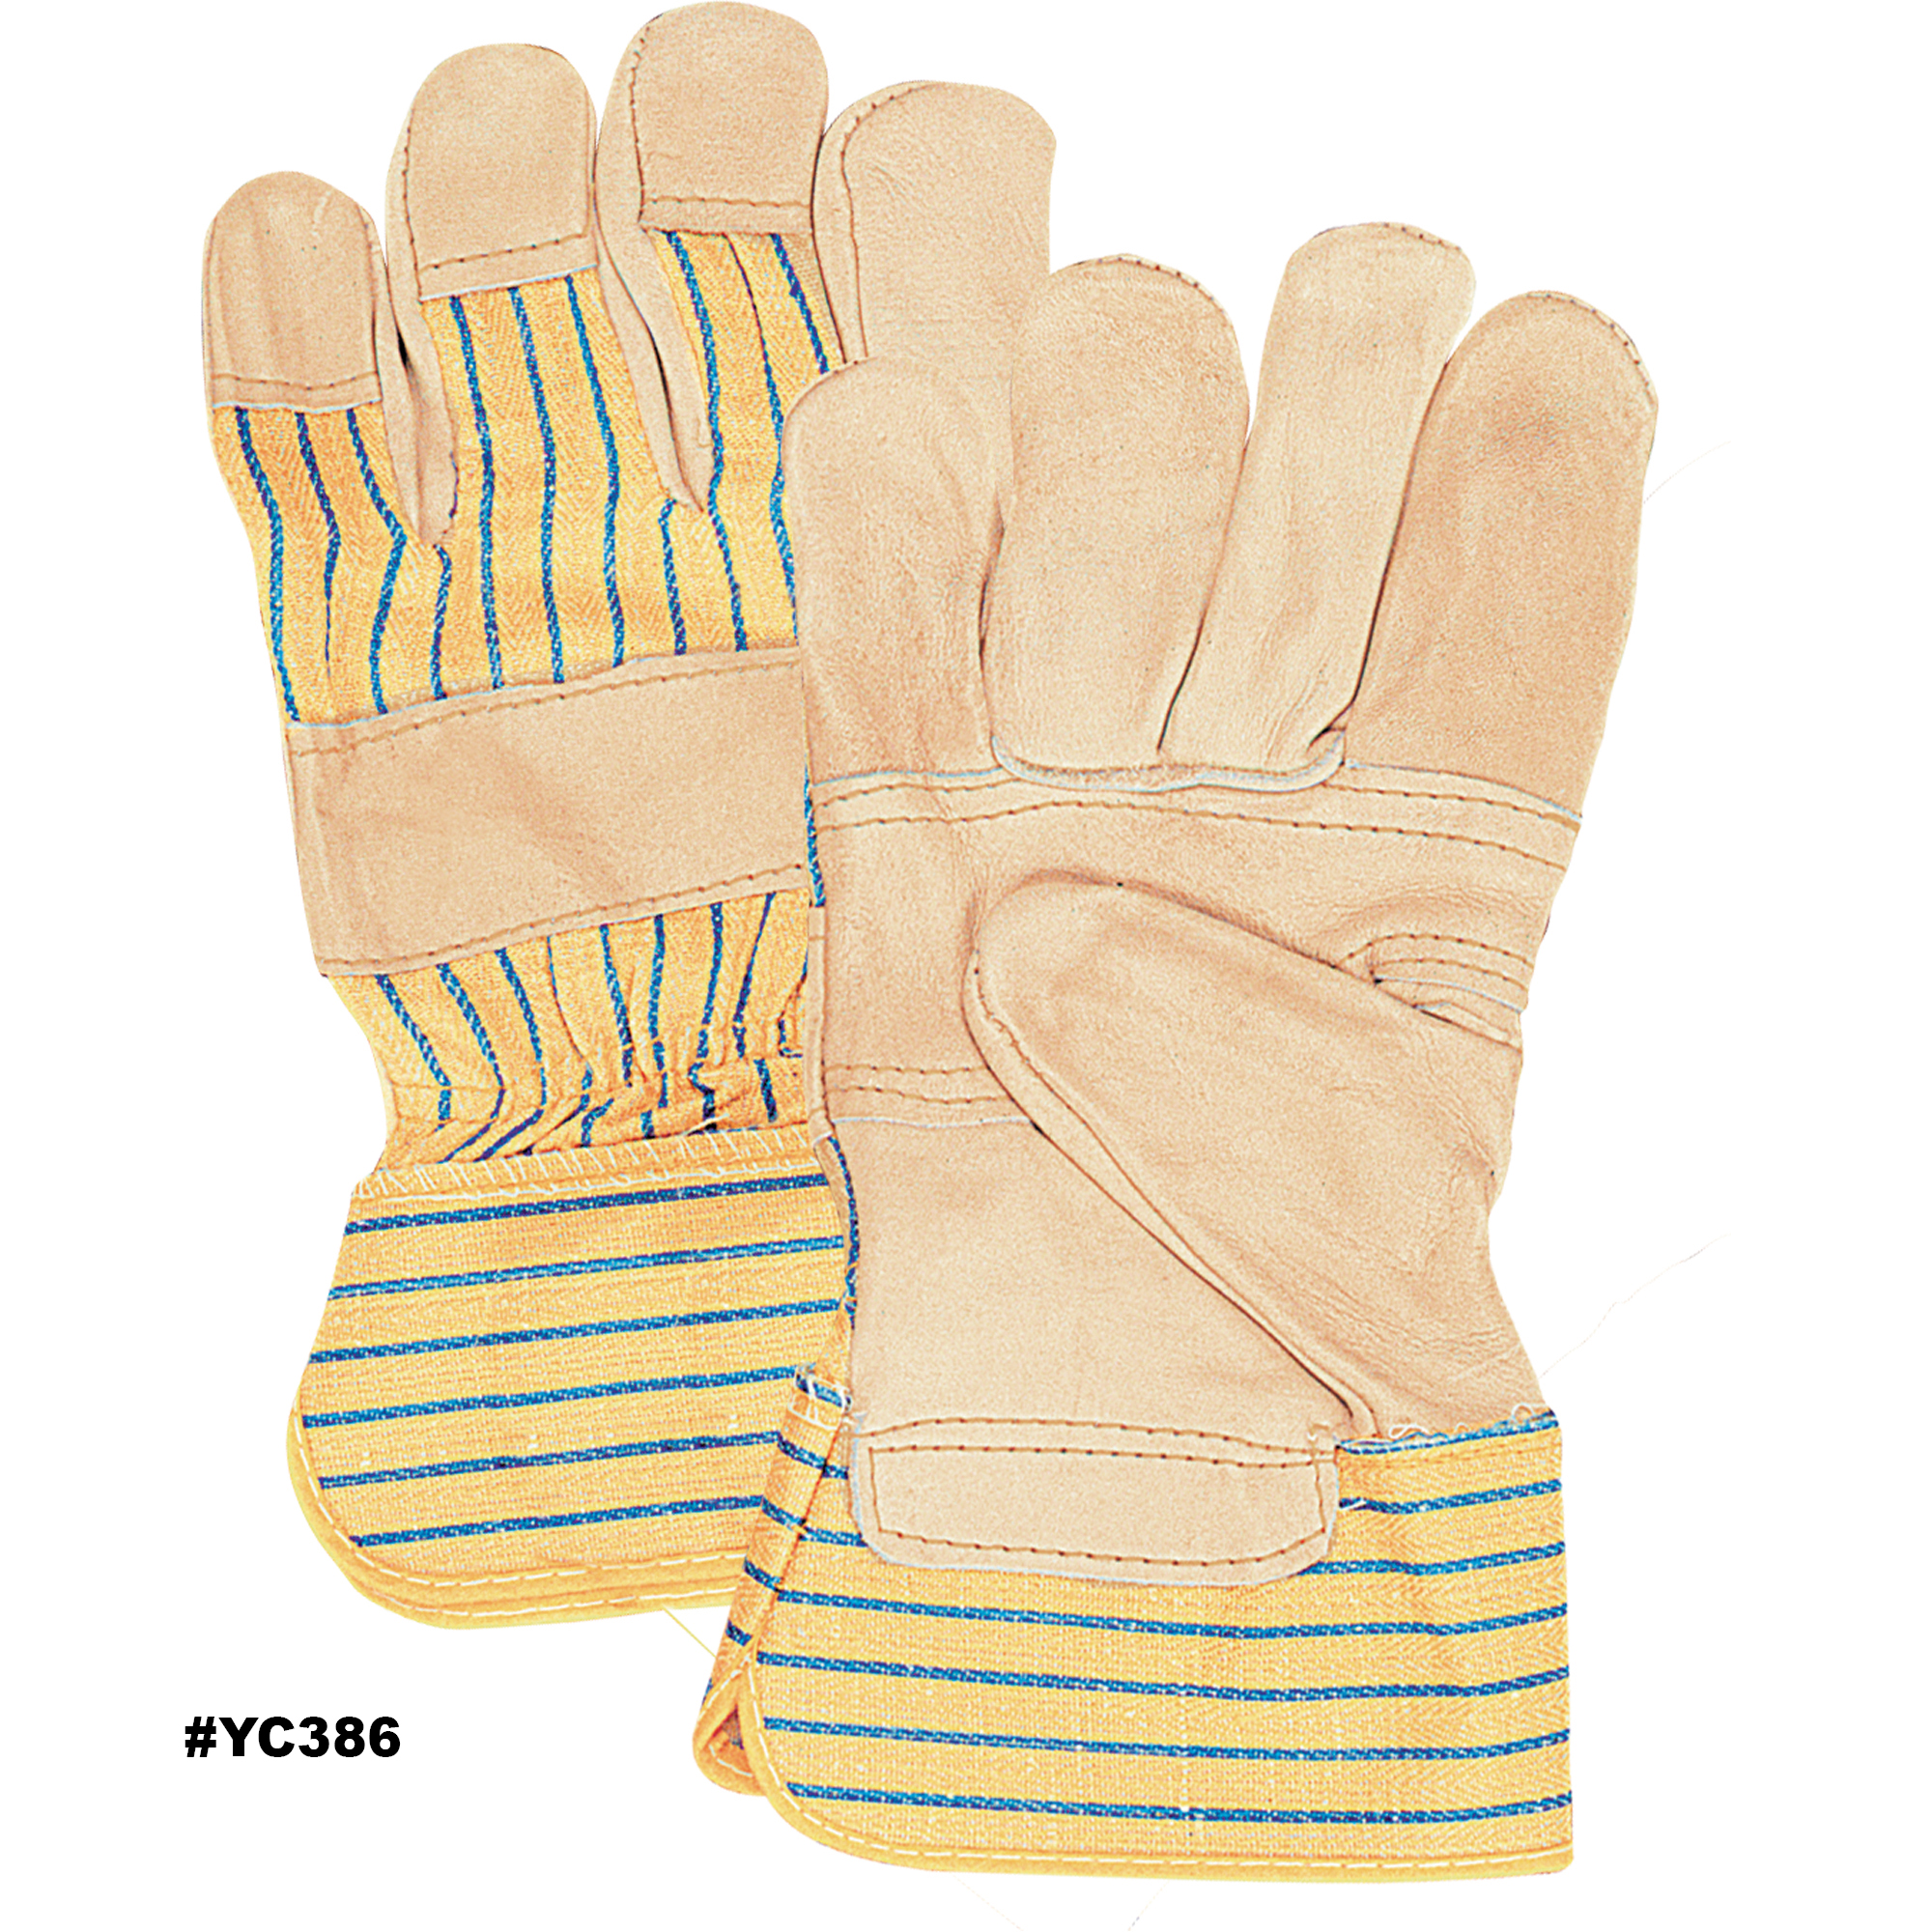 Zenith Fitters Patch Palm Gloves, Large, Grain Cowhide Palm, Cotton Inner Lining Model: YC386